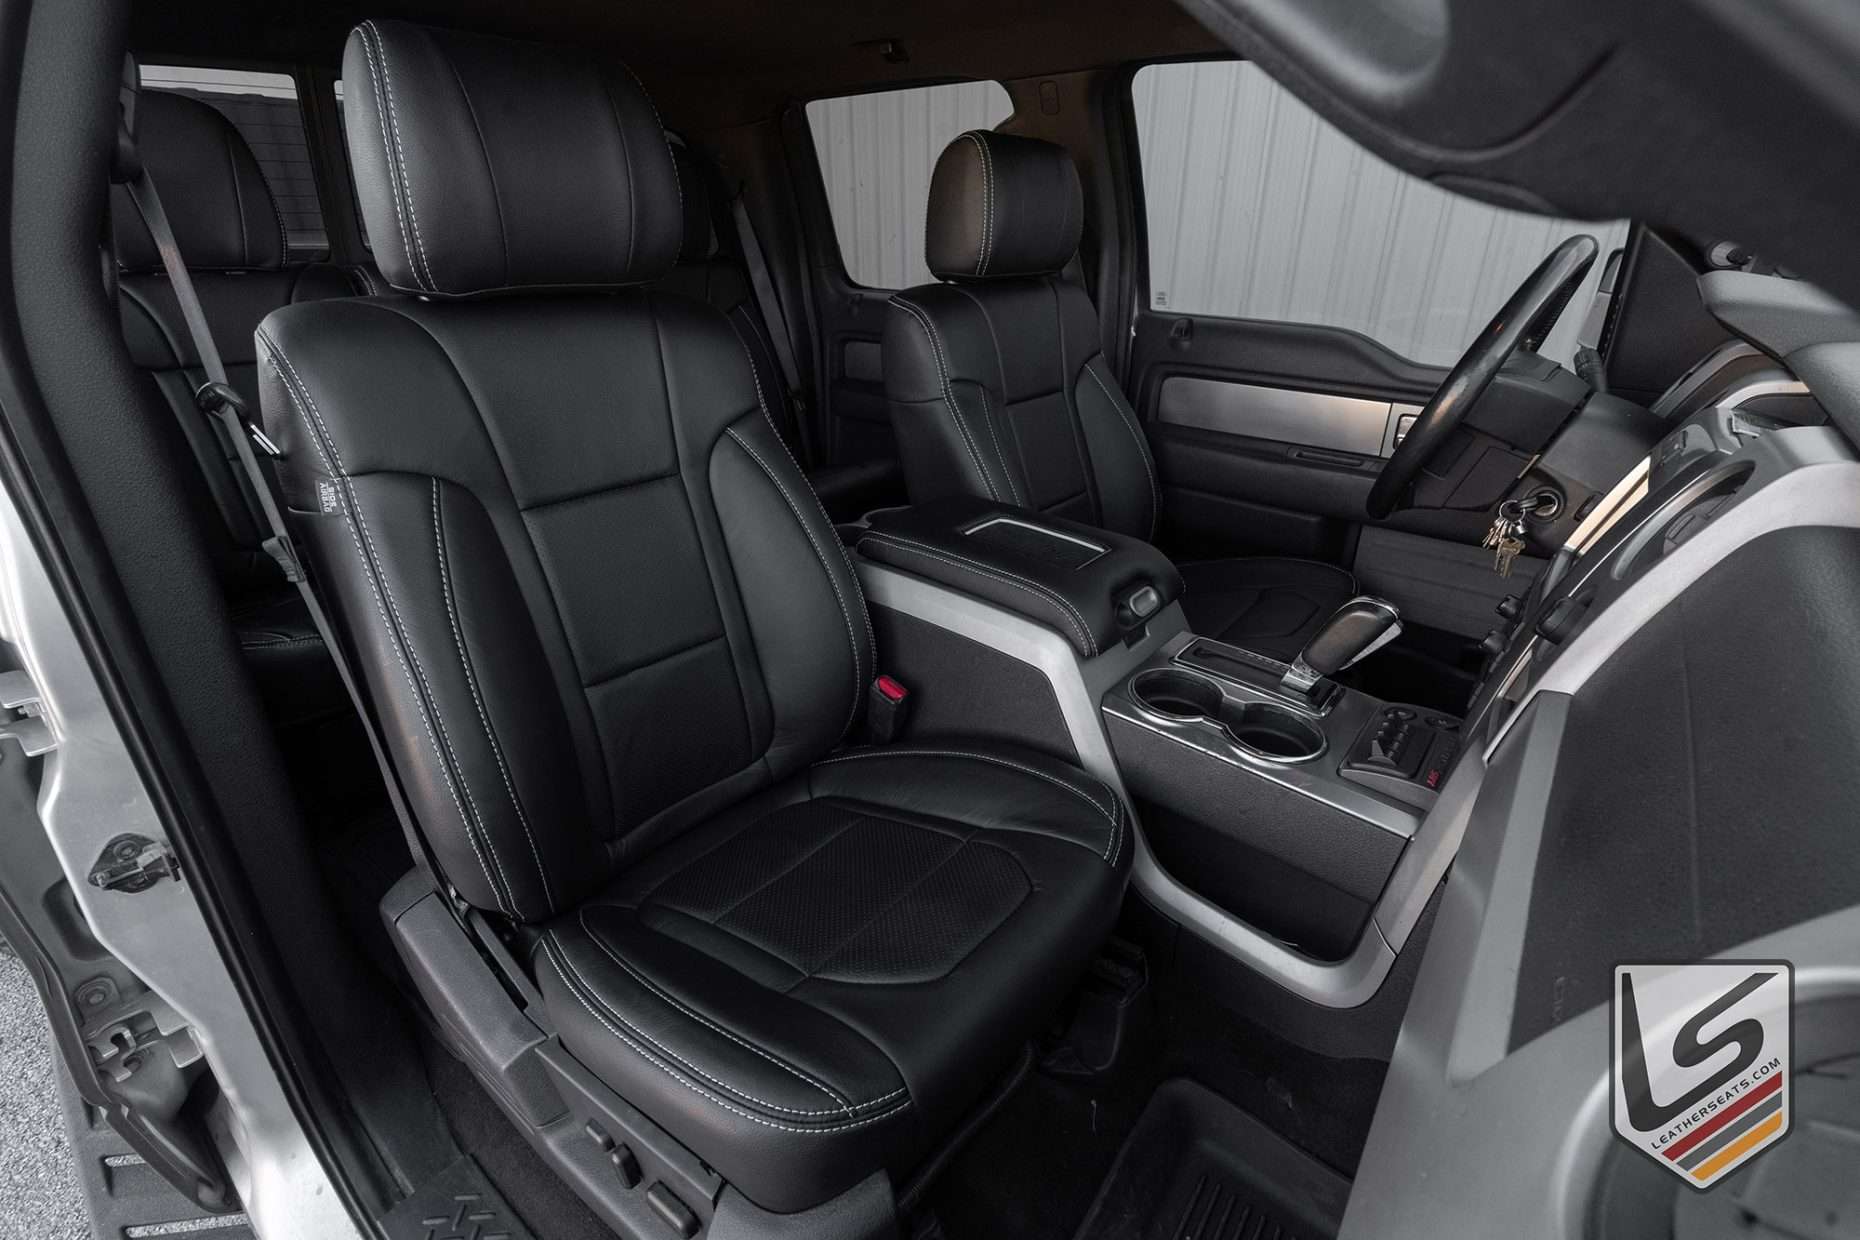 Front passenger seat with Black perforated leather - LS Gallery